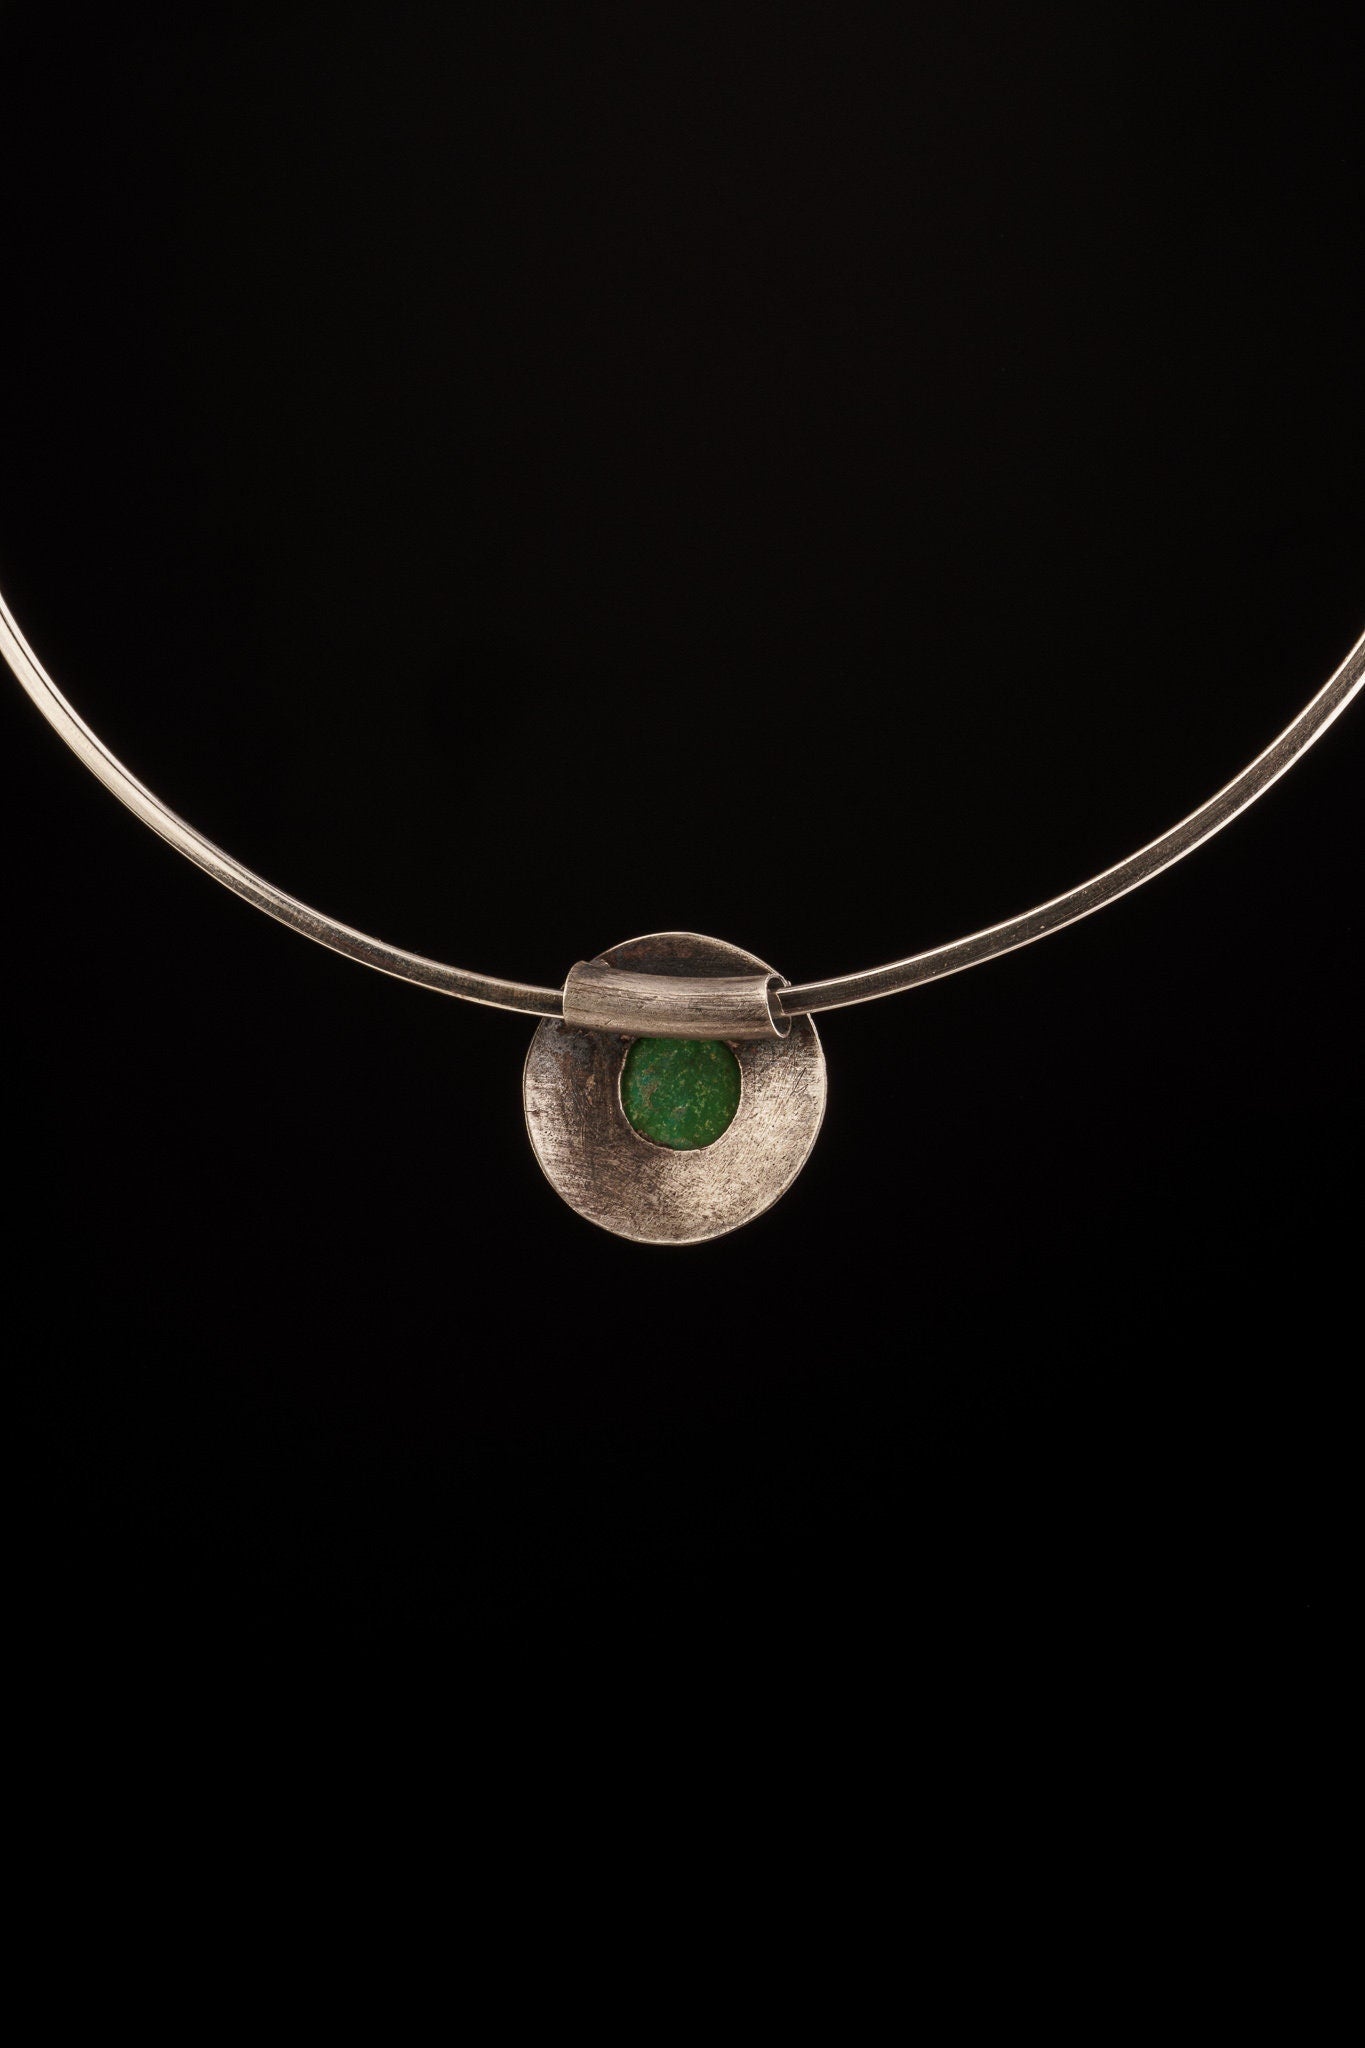 Chunky Green American Turquoise on crisscrossed Shield - Stack Pendant textured & oxidised - 925 sterling silver - Crystal Necklace